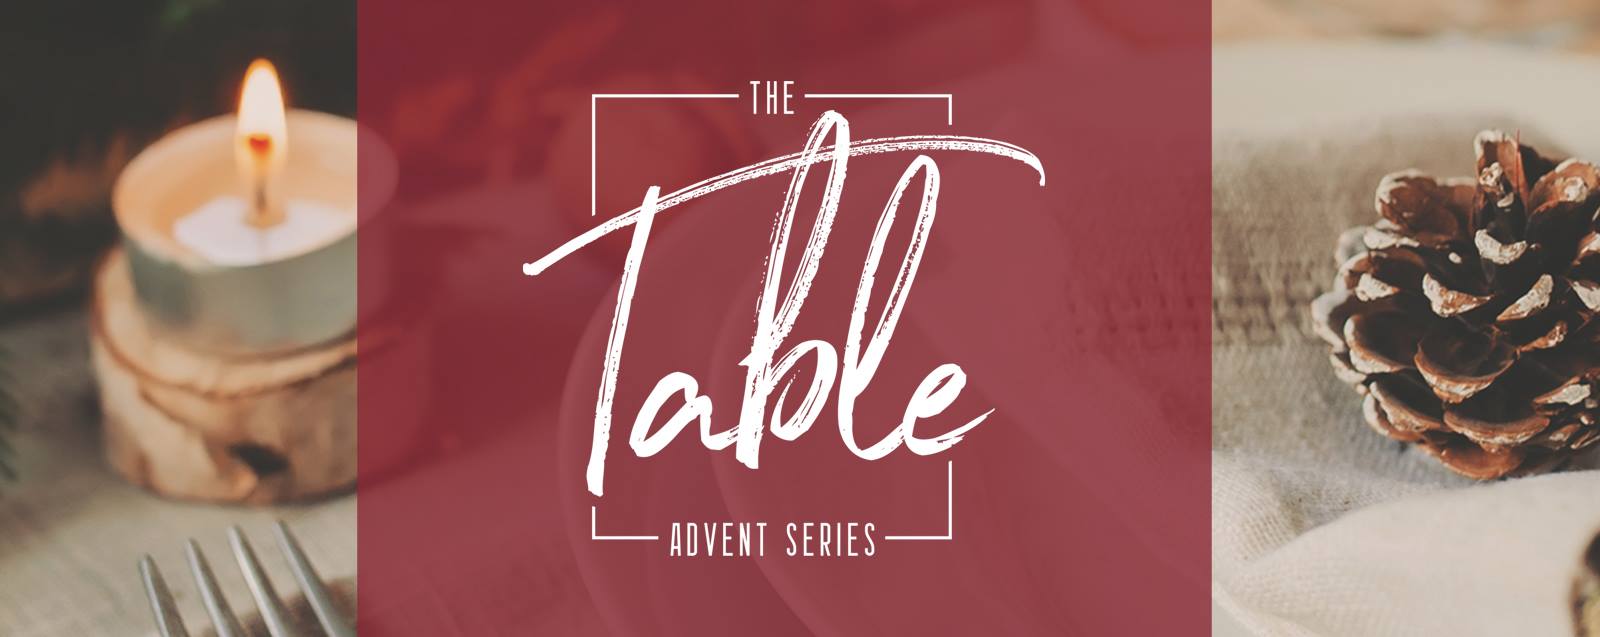 The Table advent sermon series at Pearce Church in Rochester, NY